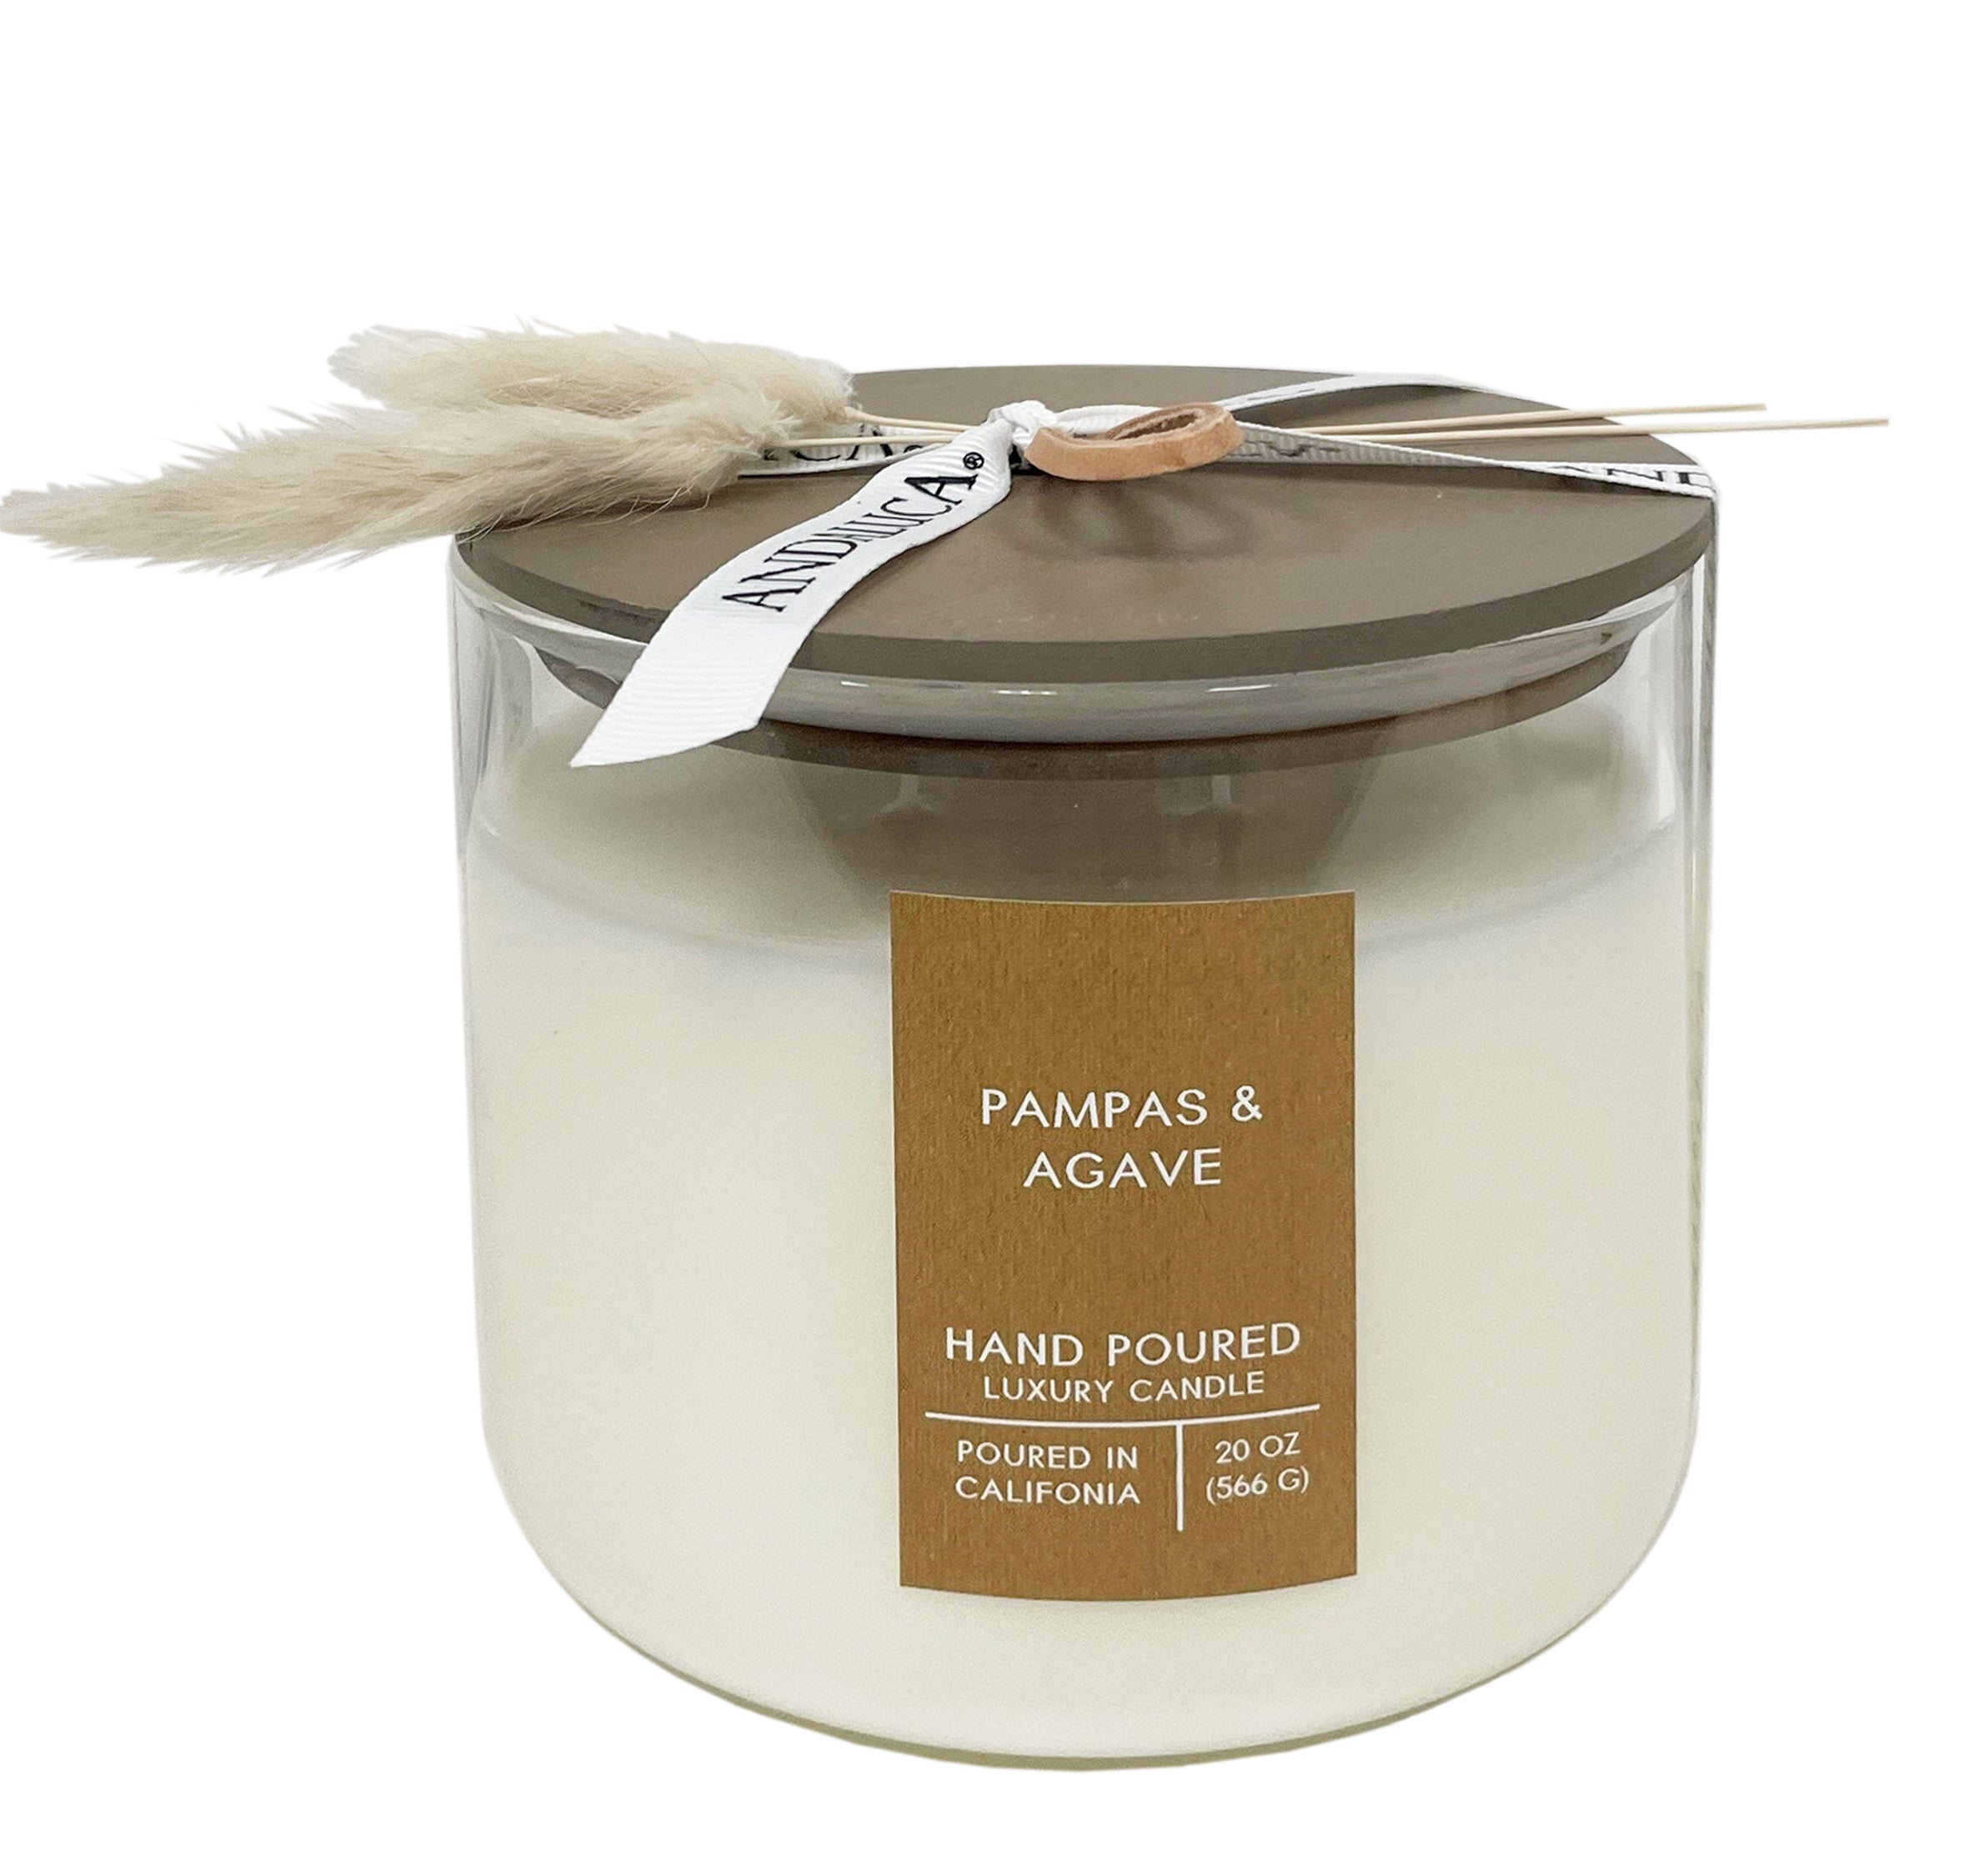 Pampas & Agave Botanical Tie 20 oz. Candle with Lid